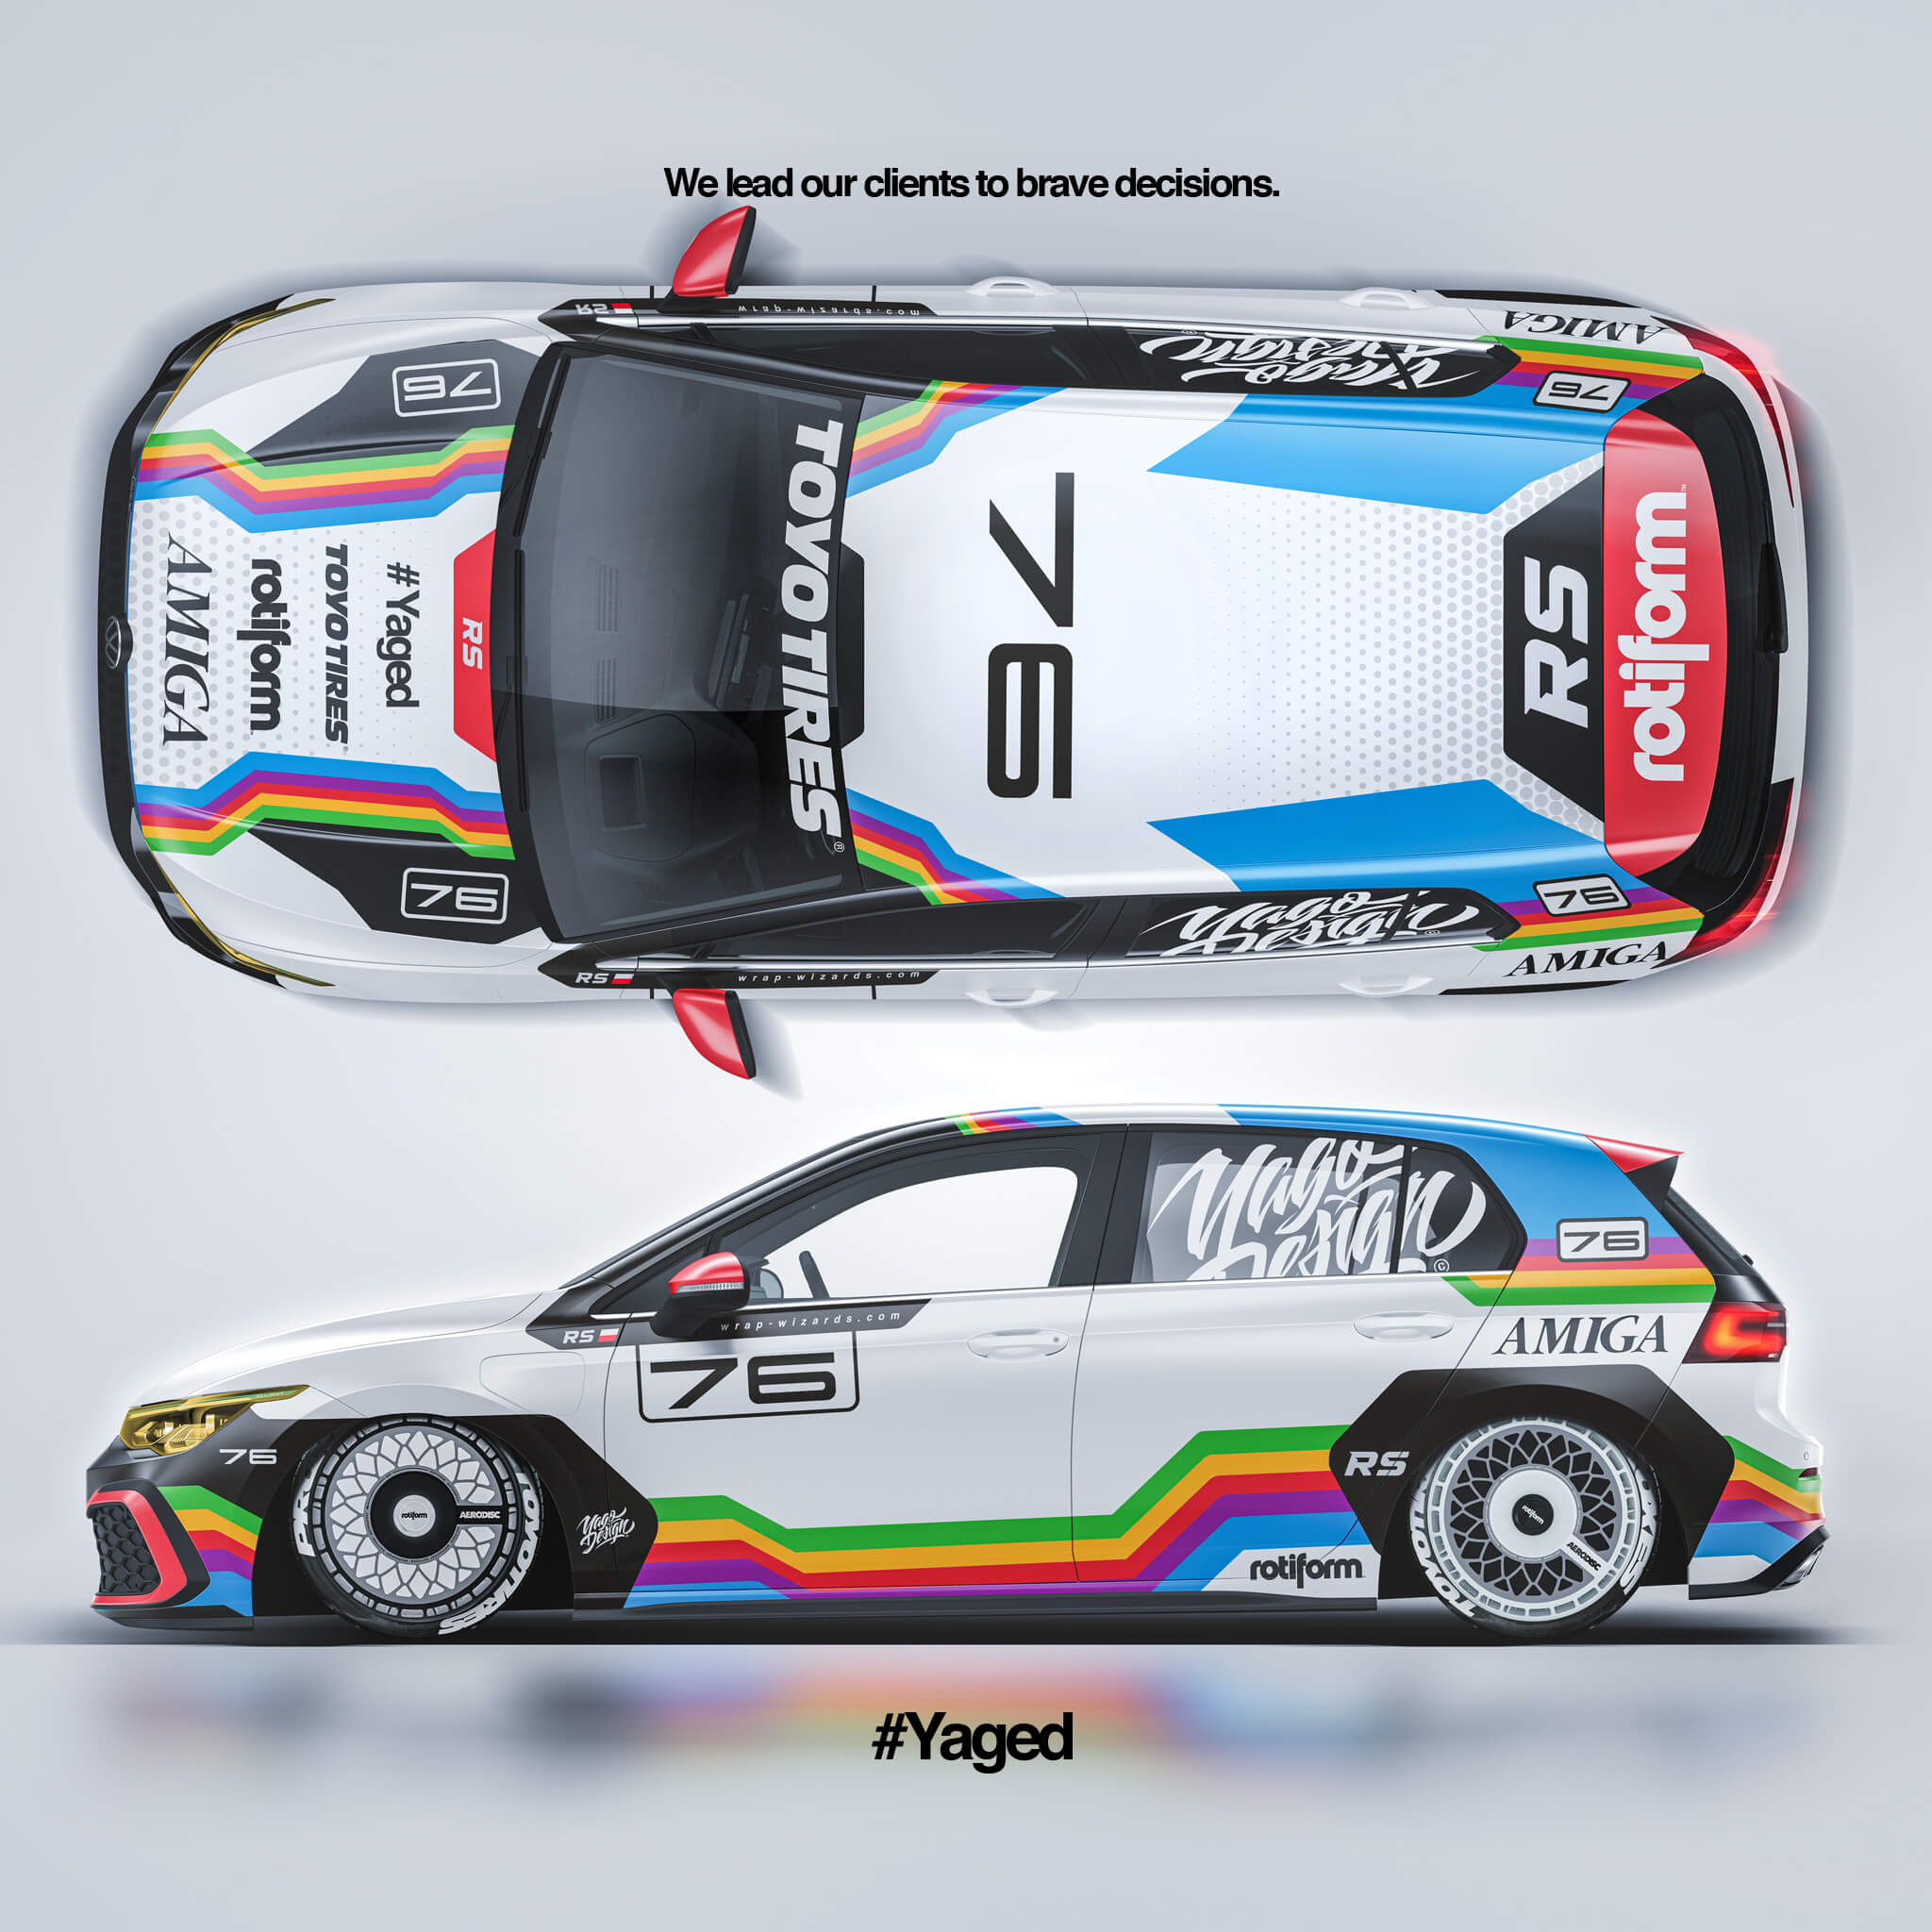 VOLKSWAGEN GOLF AMIGA SIDE AND TOP BY YAGODESIGN 2048PX